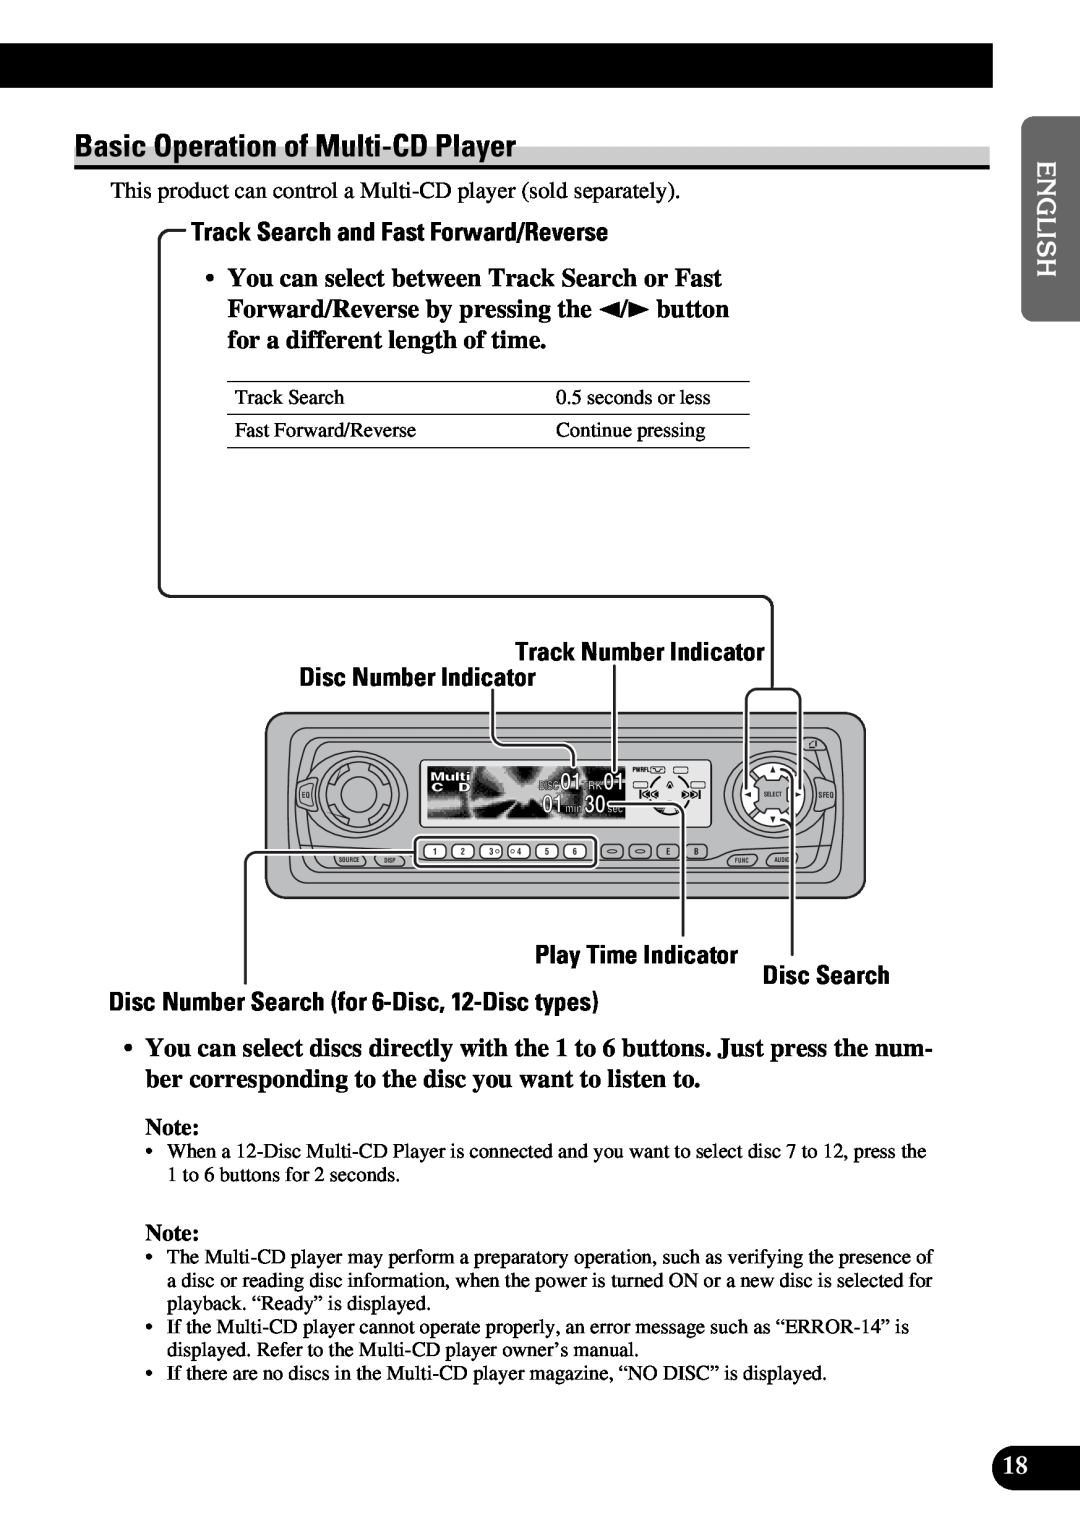 Pioneer DEH-P630, DEH-P730 operation manual Basic Operation of Multi-CD Player, Track Search and Fast Forward/Reverse 